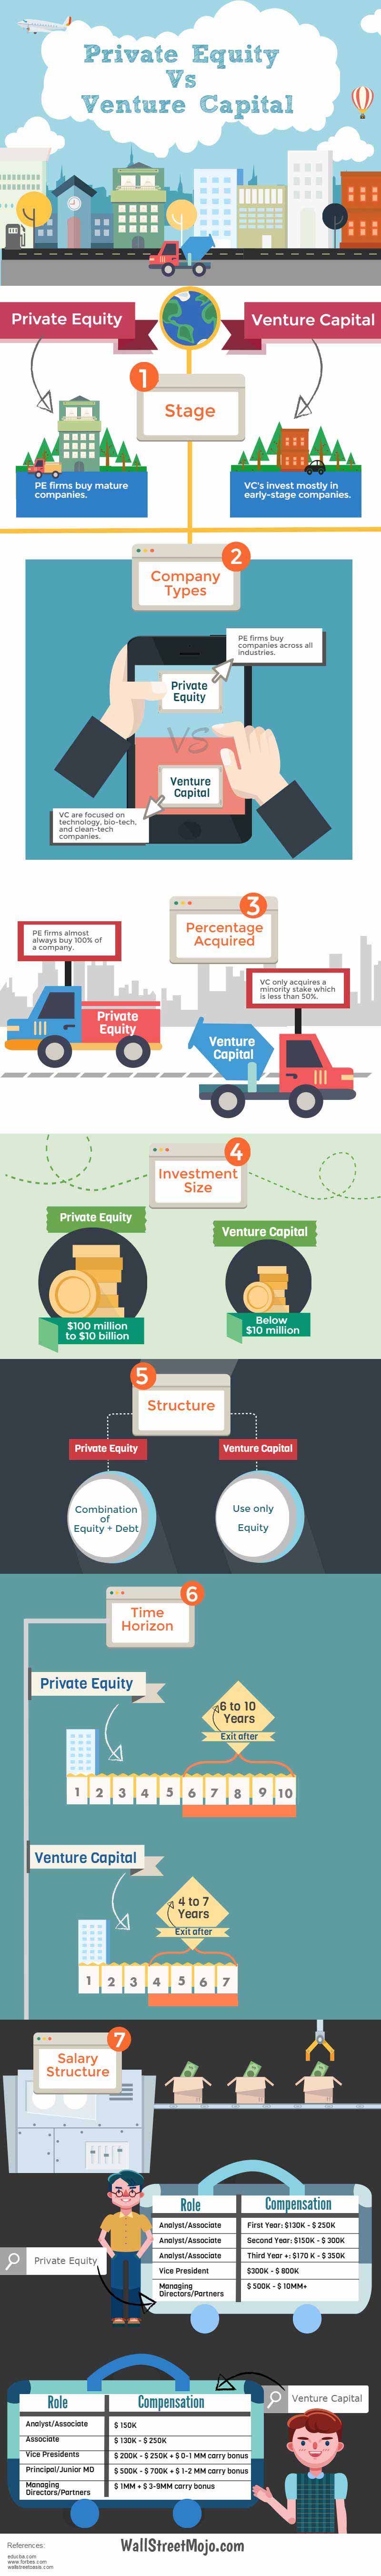 Private Equity and Venture Capital: An Infographic by WallStreetMojo | Presented by CoventryLeague.com